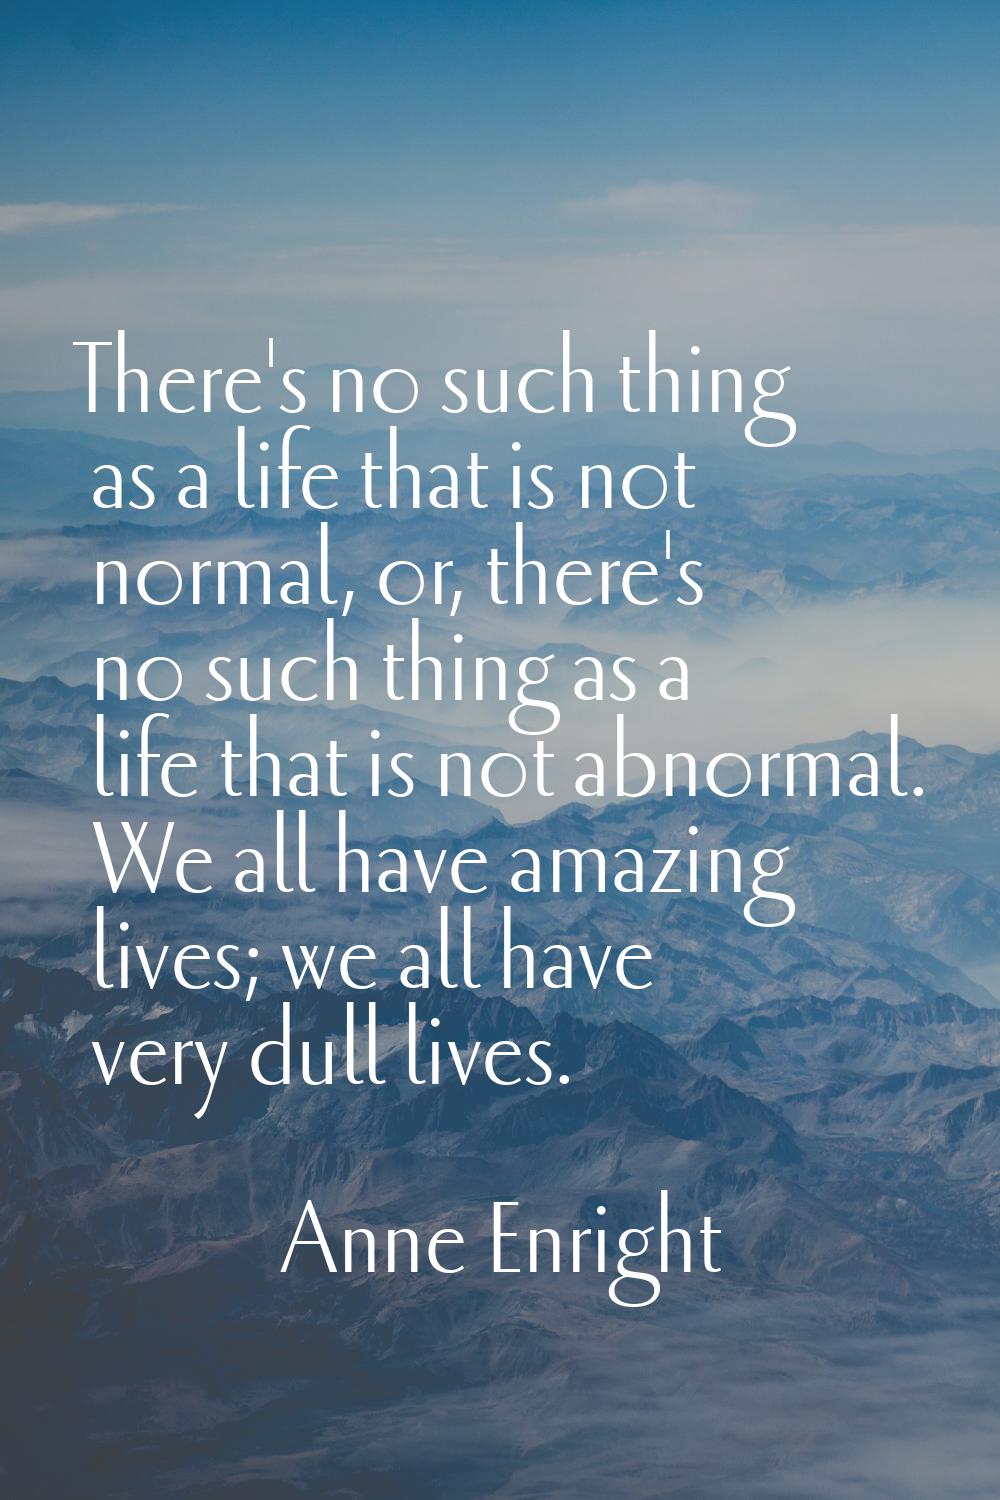 There's no such thing as a life that is not normal, or, there's no such thing as a life that is not